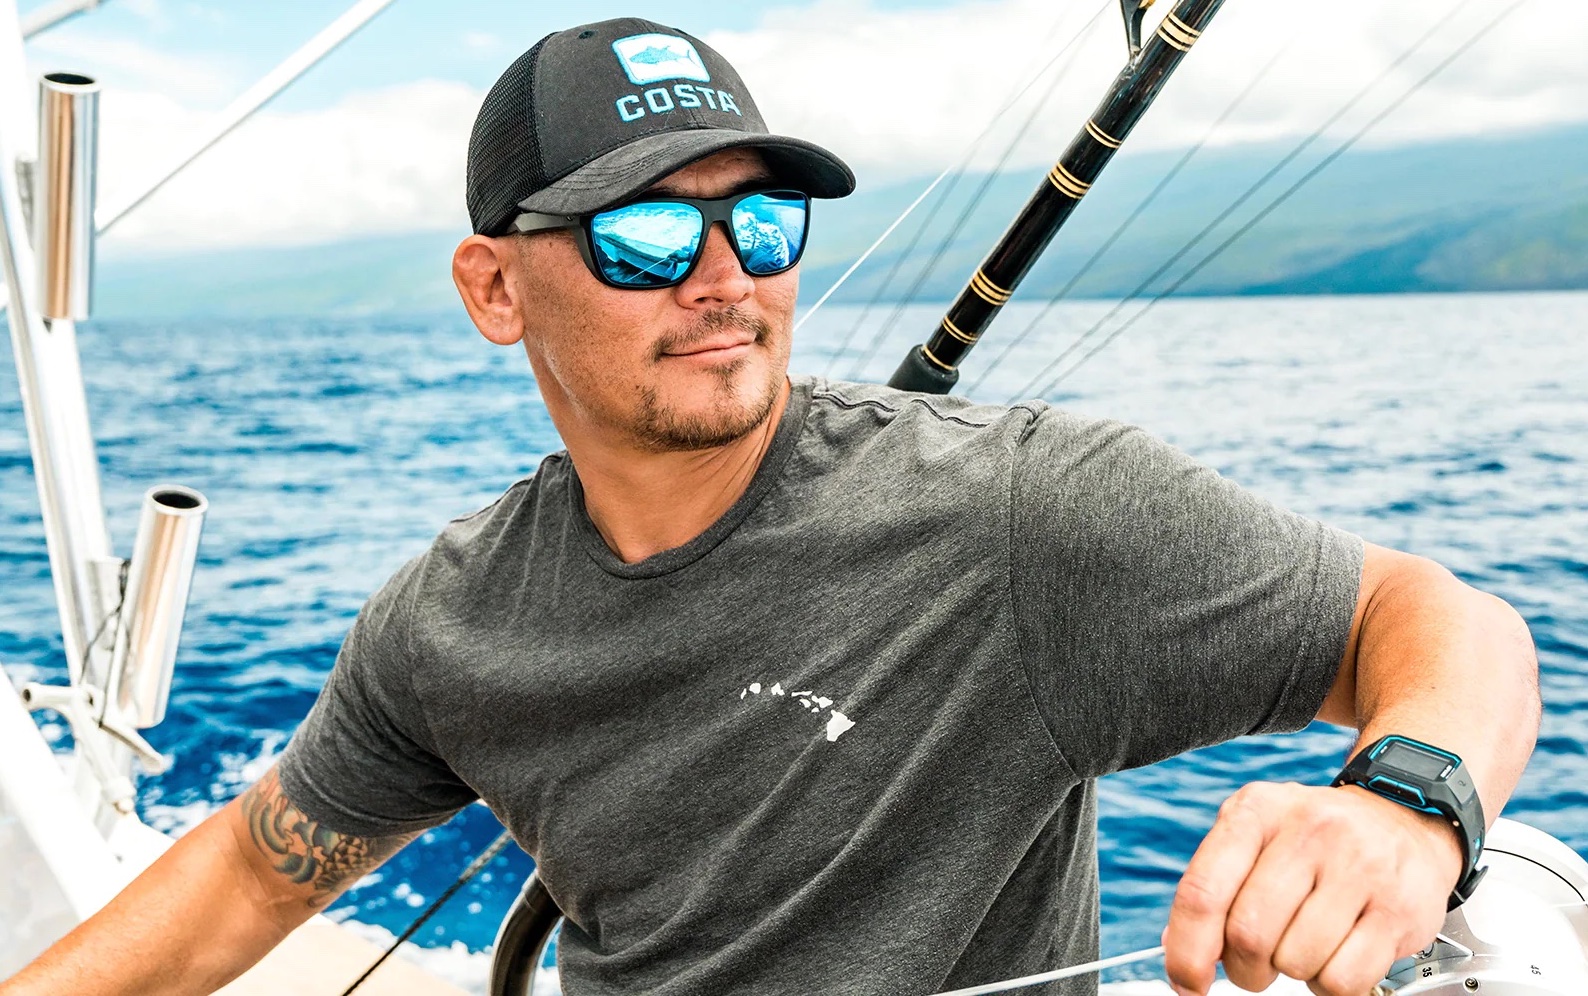 This Deal’s a Steal: Glare-Cutting, UV-Blocking Sunglasses for Fishing